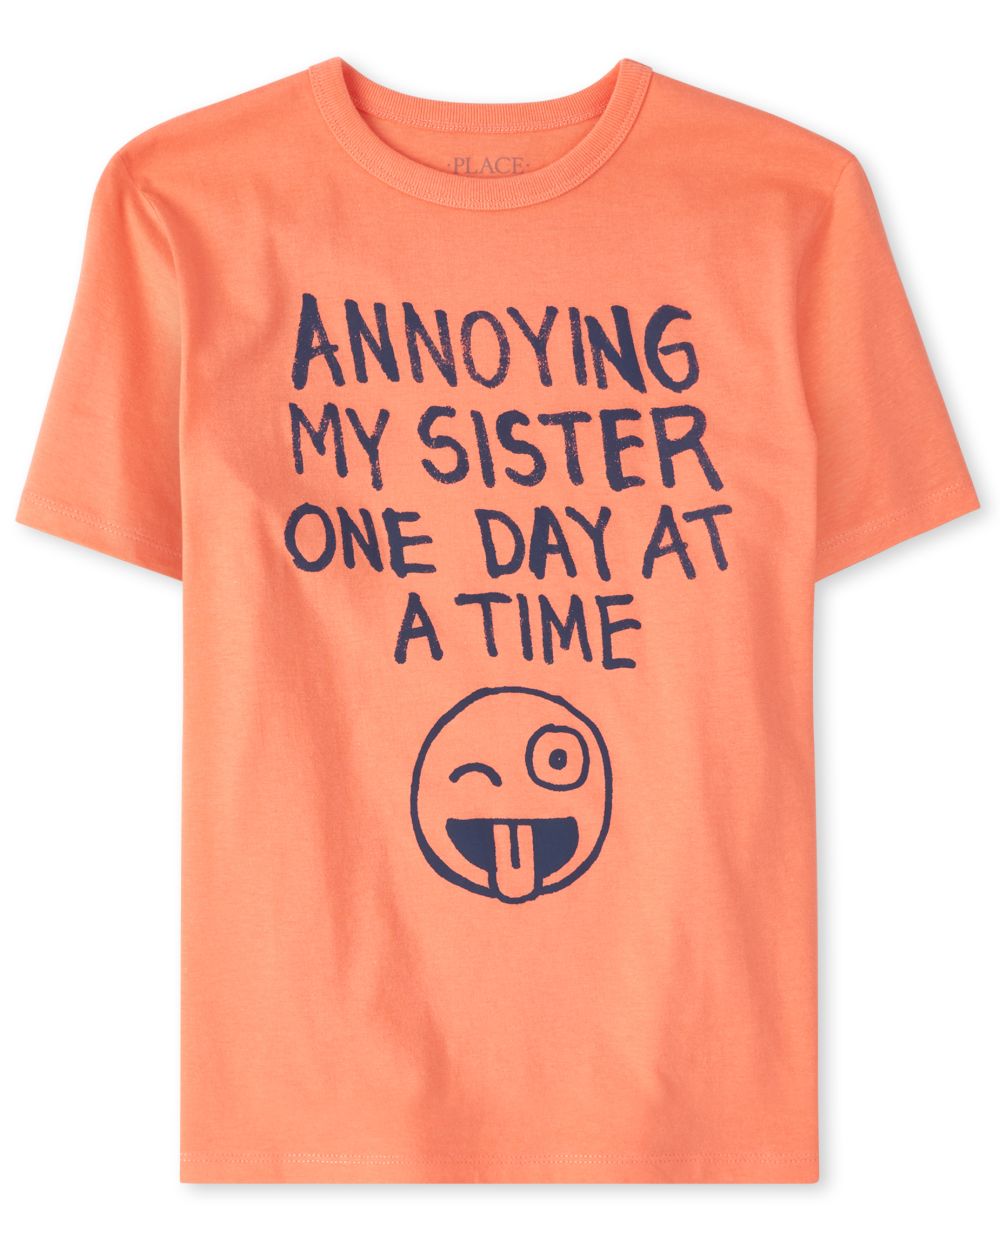 Boys Short Sleeve 'Annoying My Sister One Day At A Time' Graphic Tee